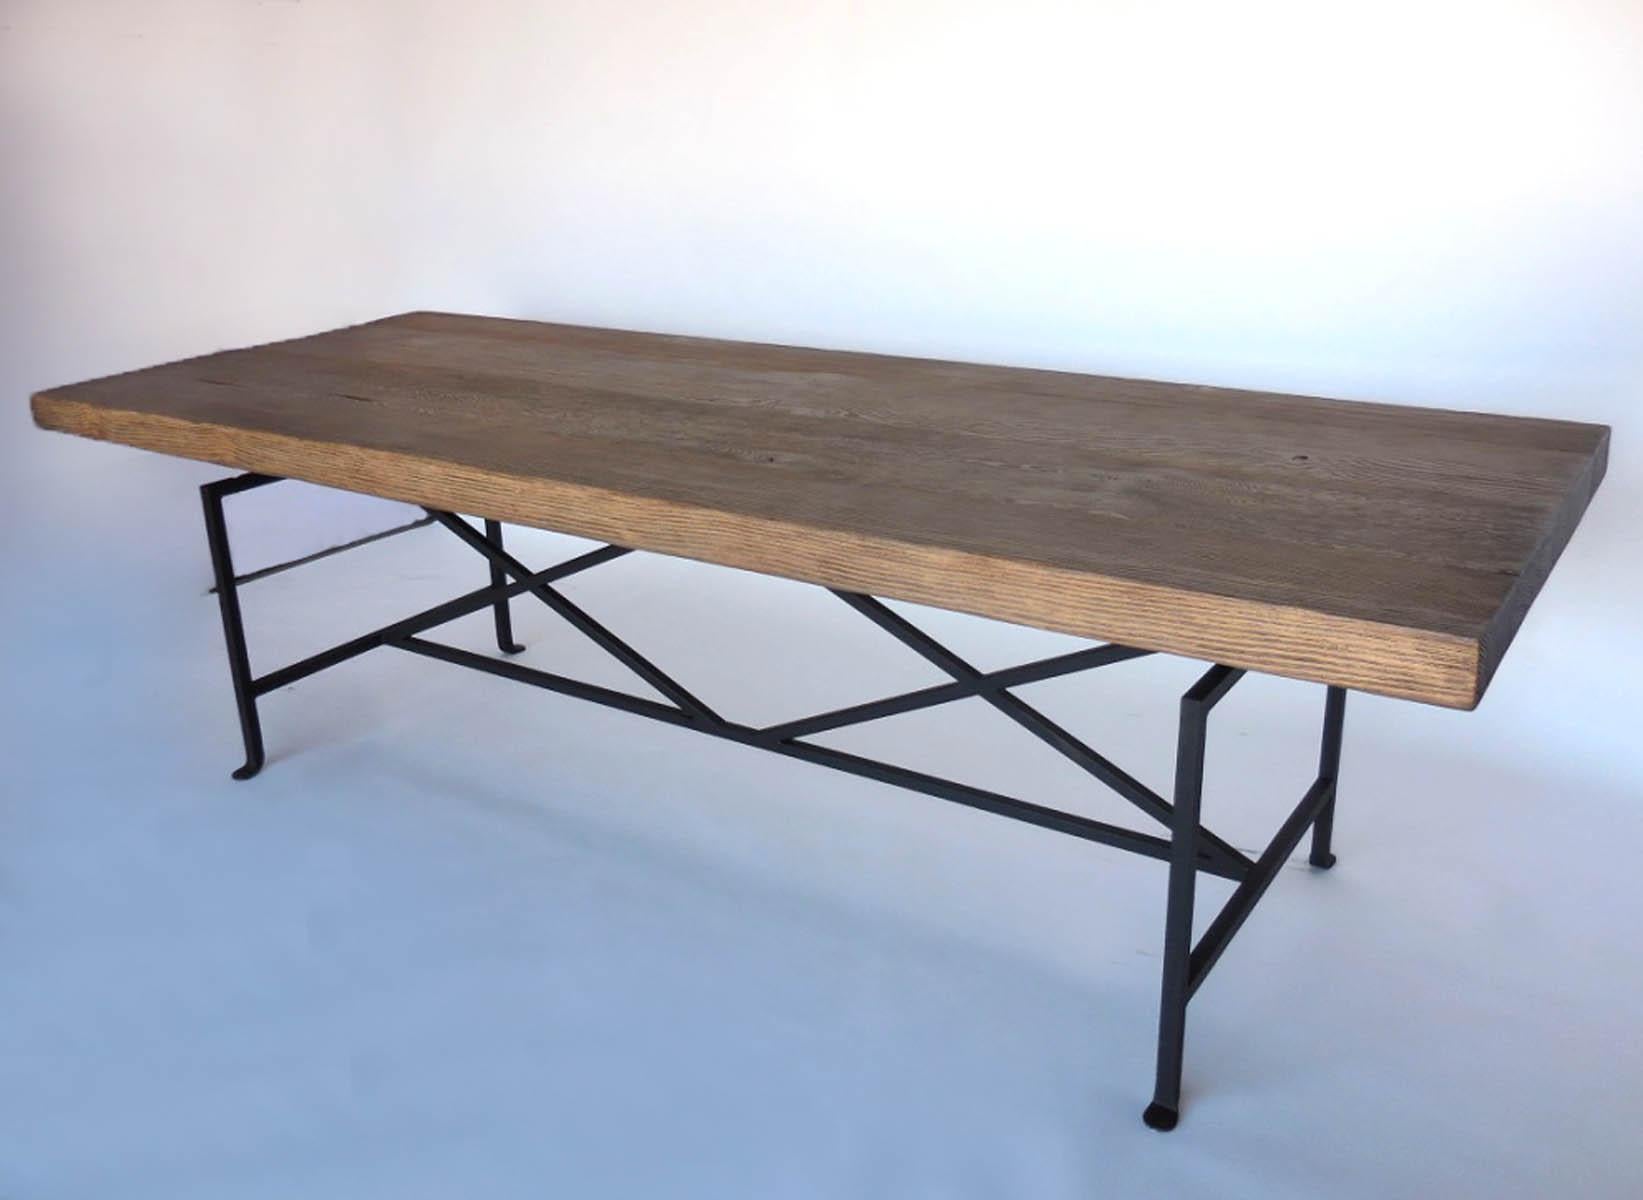 Custom douglas fir table with hand forged iron base. Top is built up to desired thickness, as shown,  3 to 3.5 inch Can be made any size and with a variety of finishes. 
Made in Los Angeles by Dos Gallos Studio. 
CUSTOM PRICES ARE SUBJECT TO CHANGE